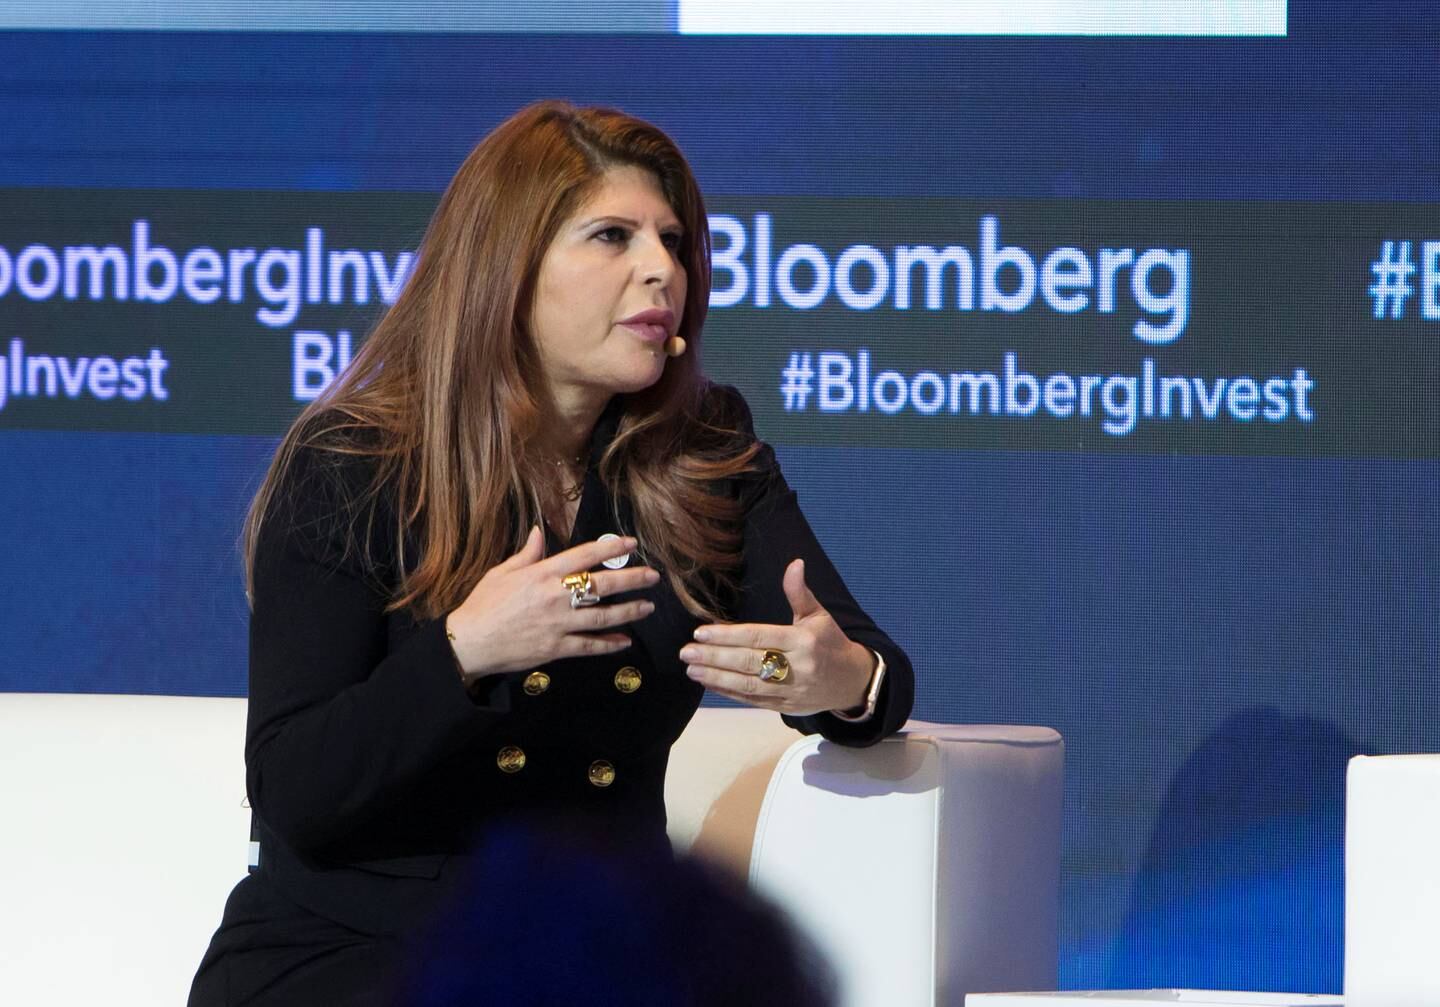 ABU DHABI, UNITED ARAB EMIRATES - Rola Abu Manneh, Chief Executive Officer Standard Chartered Bank, UAE, at the Bloomberg Invest, Four Seasons Hotel.  Leslie Pableo for The National 